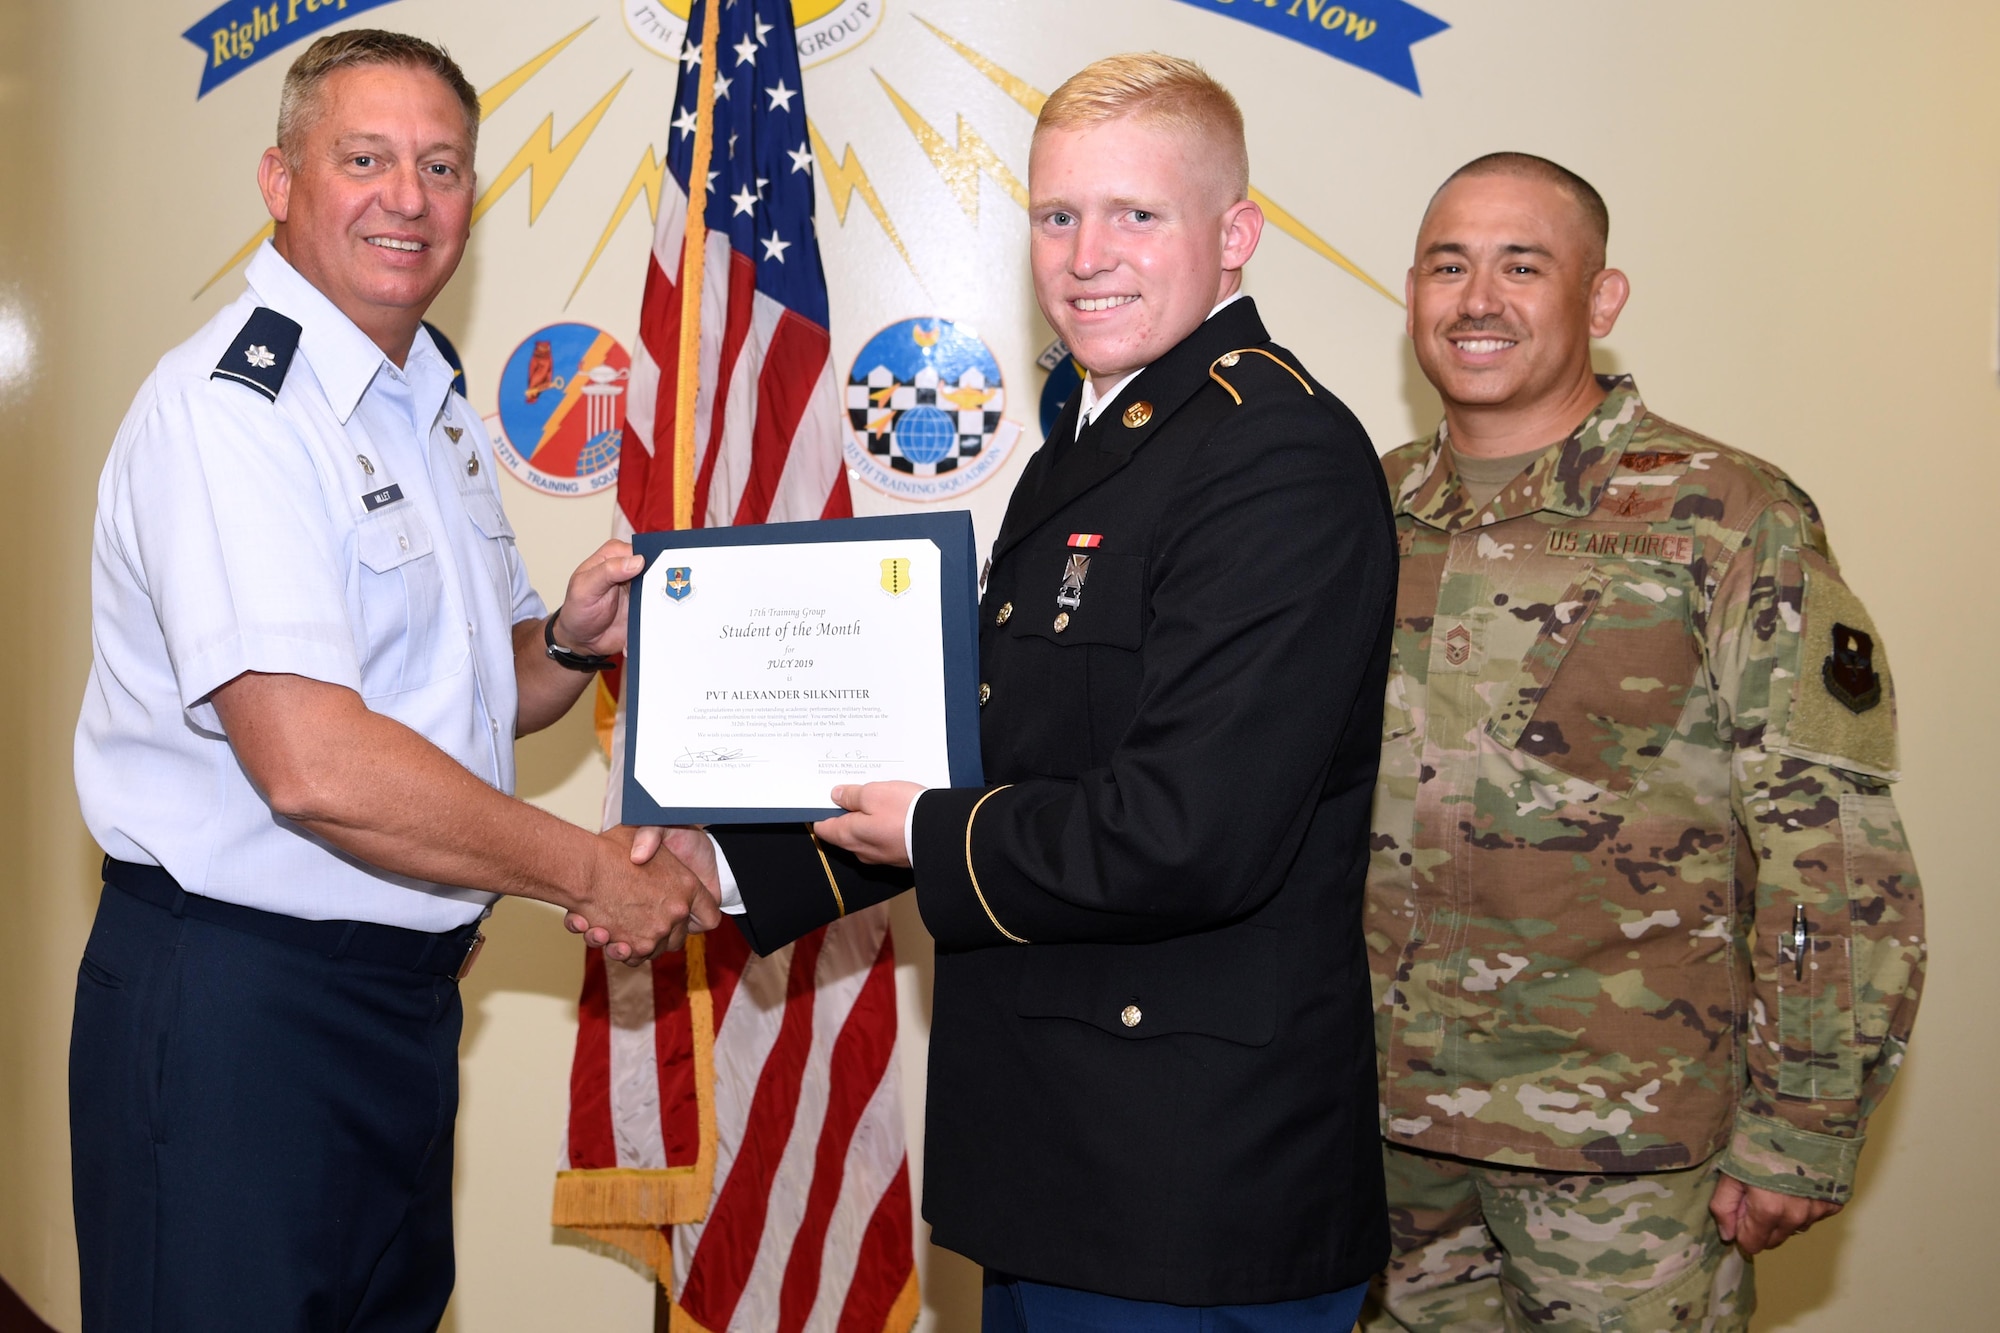 U.S. Air Force Lt. Col. Herbert Millet III, 313th Training Squadron commander, presents the 312th Training Squadron Student of the Month award to U.S. Army Pvt Alexander Silknitter, 312th TRS student, at the Brandenburg Hall on Goodfellow Air Force Base, Texas, August 2, 2019. The 312th TRS’s mission is to provide Department of Defense and international customers with mission ready fire protection and special instruments graduates and provides mission support for the Air Force Technical Applications Center. (U.S. Air Force photo by Airman 1st Class Abbey Rieves/Released)